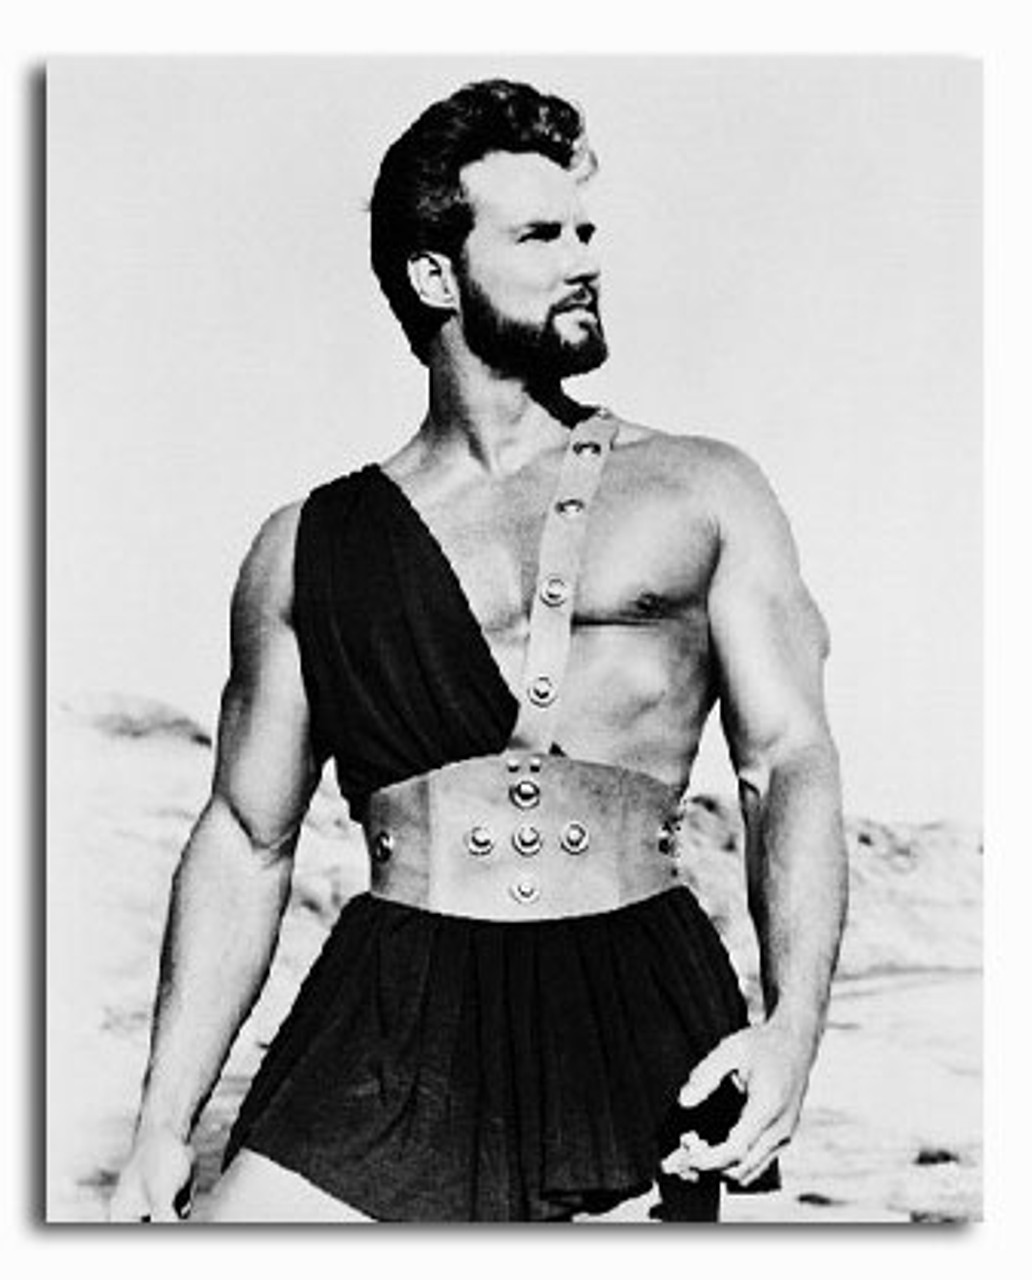 ss2229890-movie-picture-of-steve-reeves-buy-celebrity-photos-and